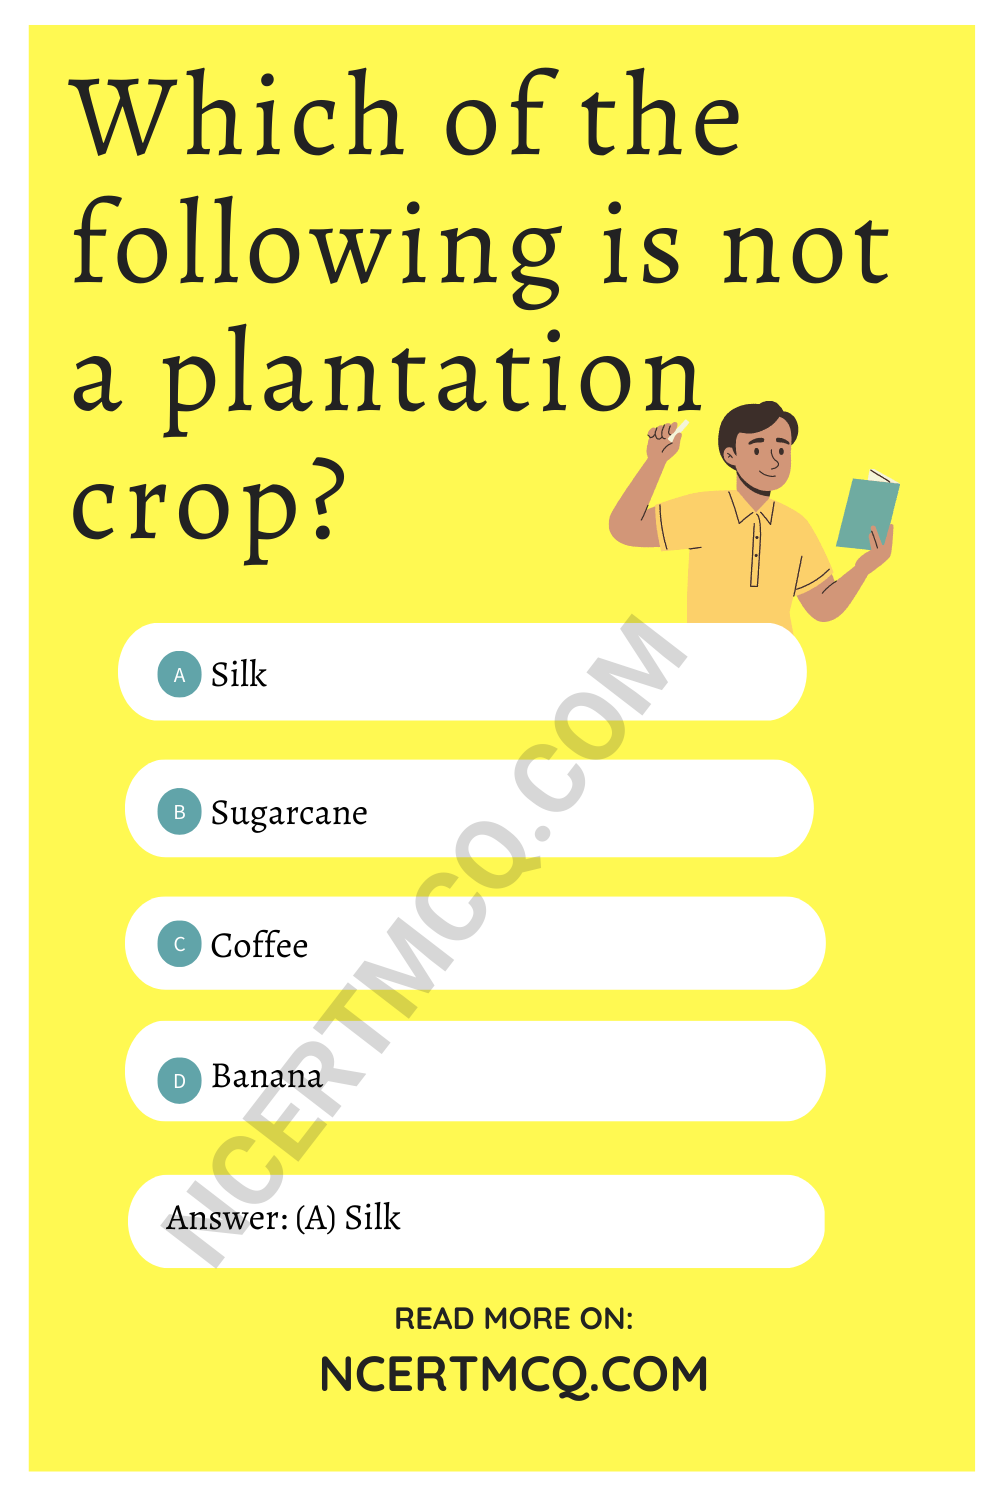 Which of the following is not a plantation crop?